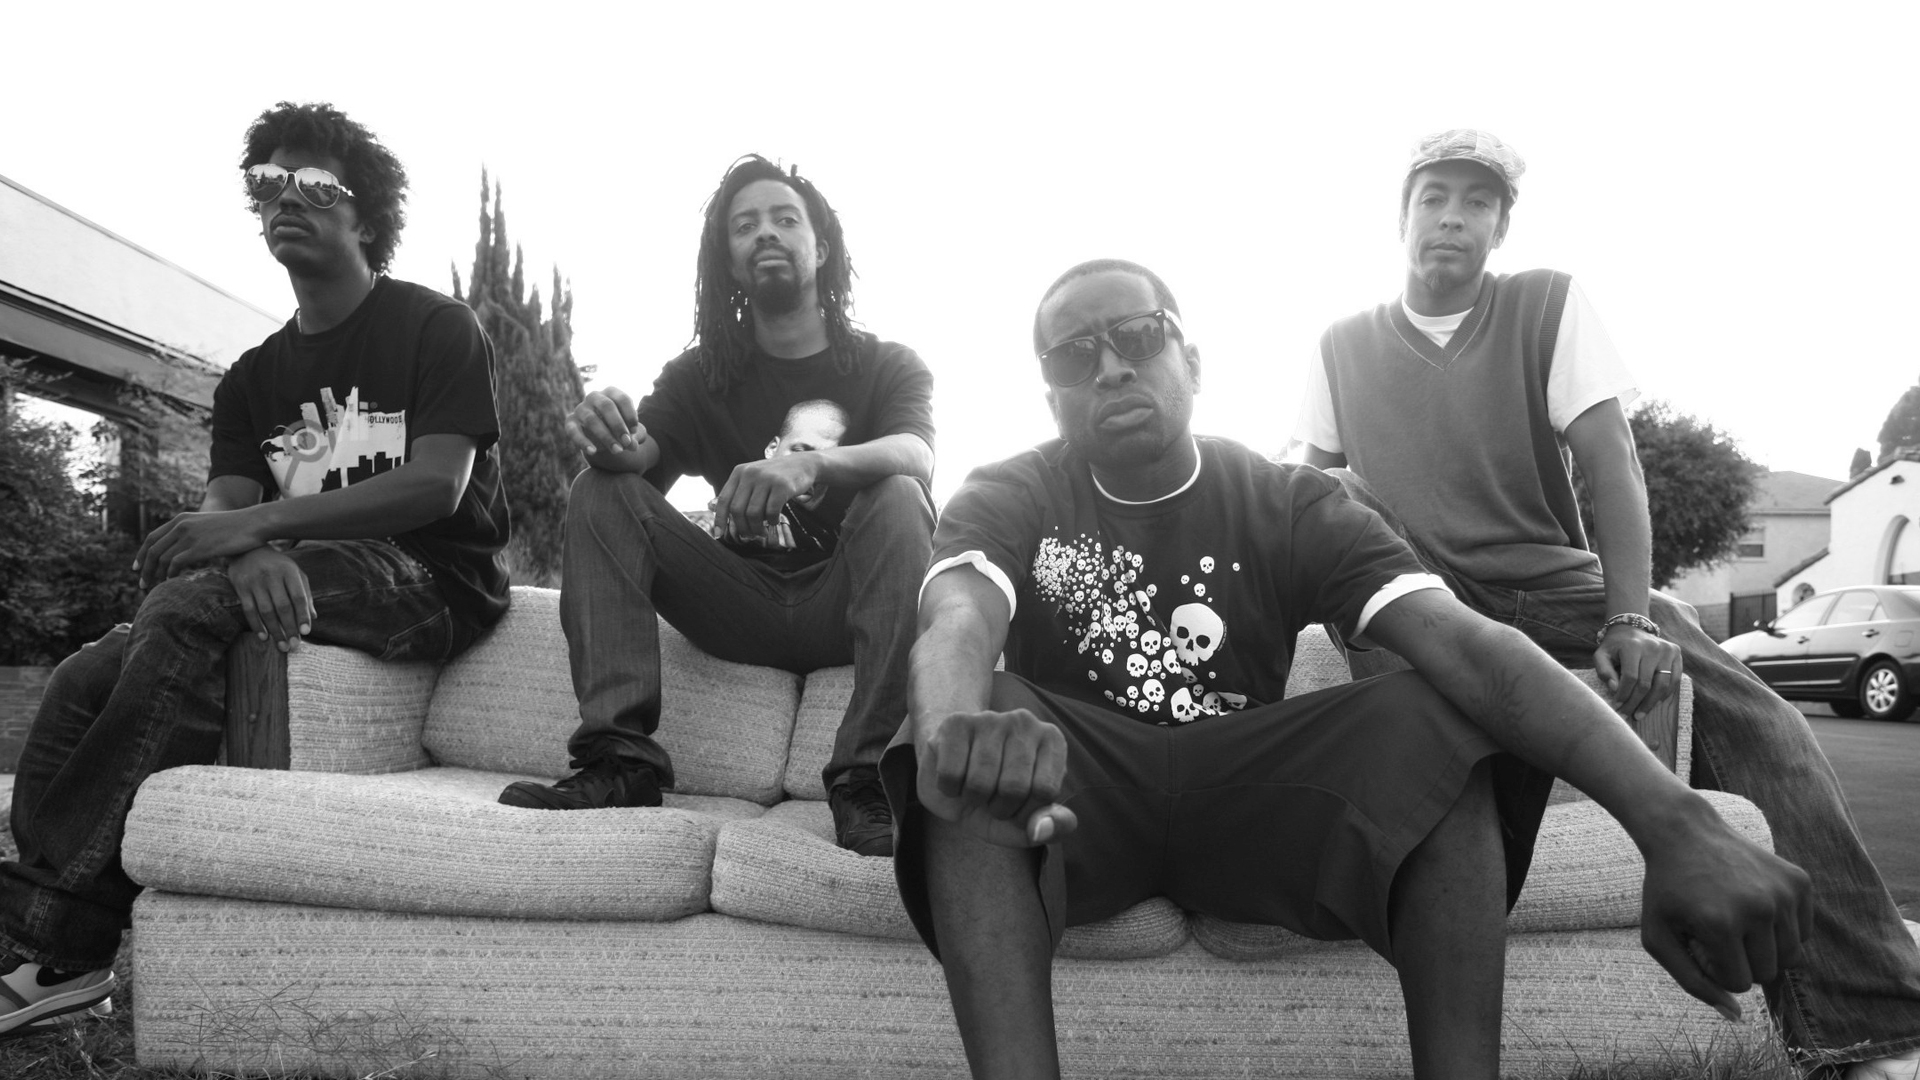 pharcyde tour cancelled